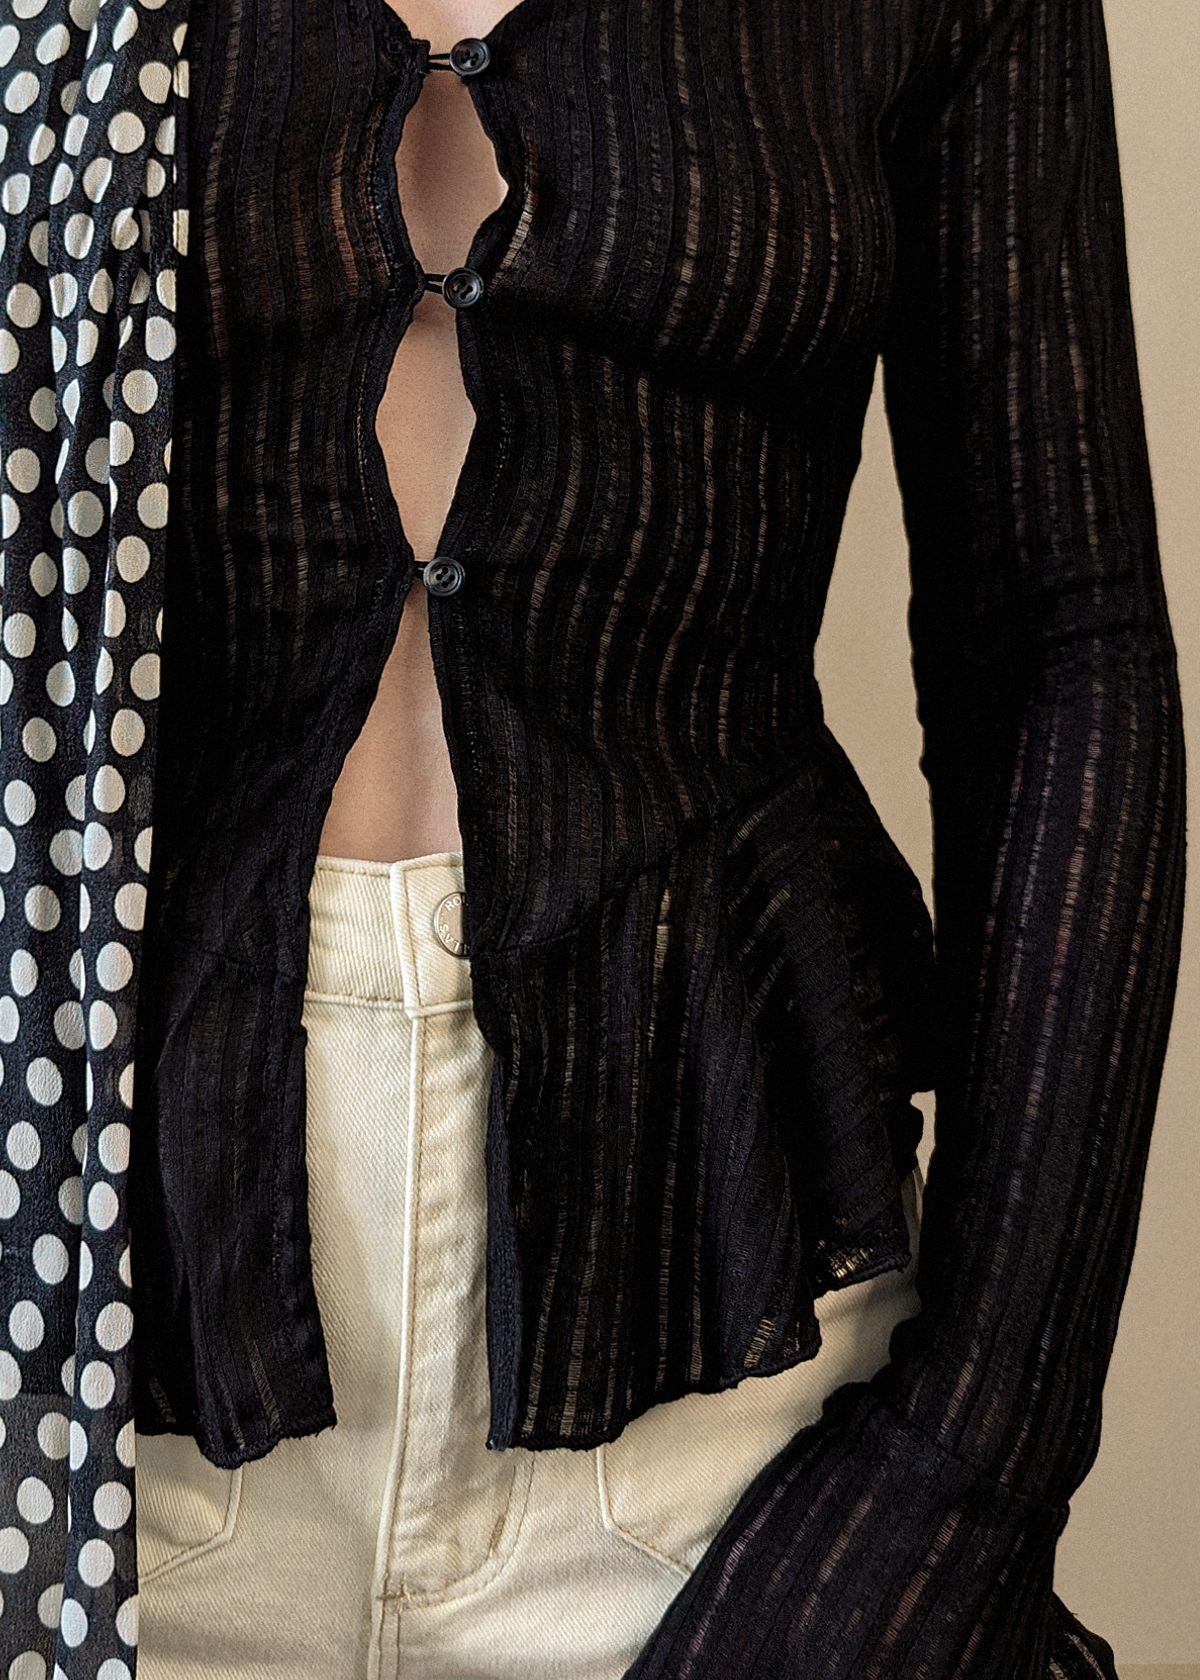 Motel Rocks Black Sheer Woven Knit Cardigan with a deep v neckline, button front, and fluted bell sleeves